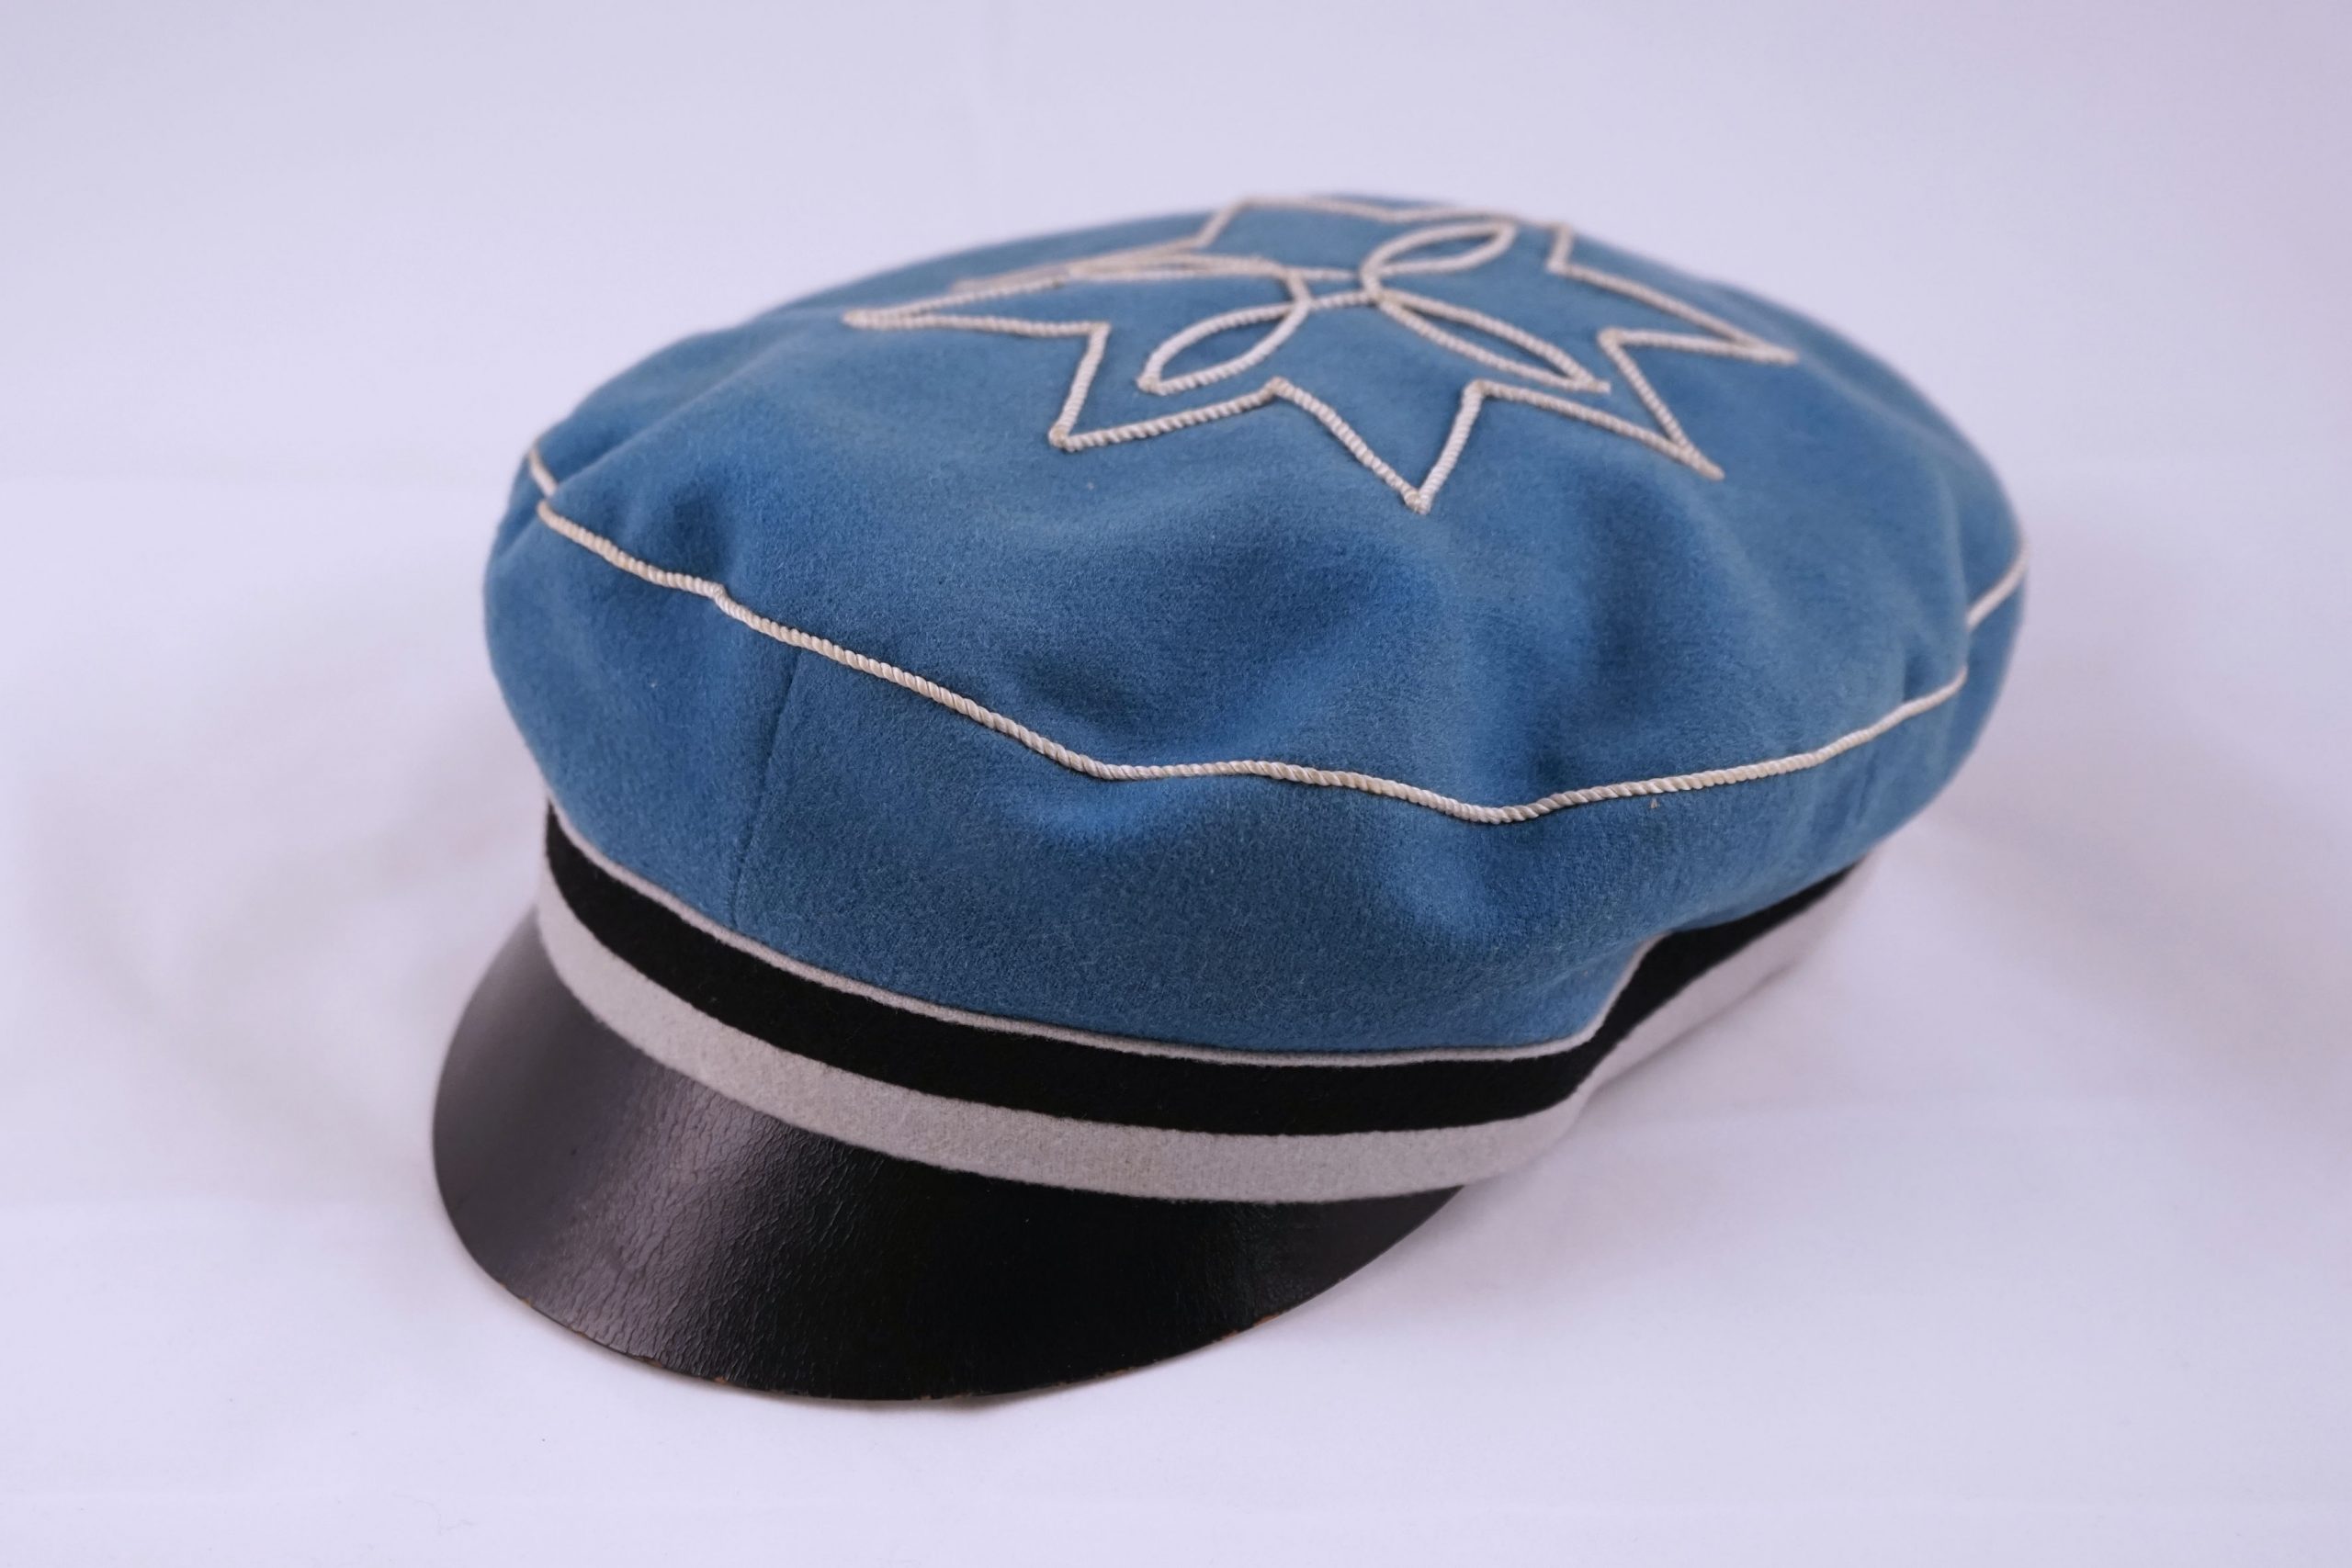 A cap embroidered with a white star and made of blue felt fabric, with a black-and-white band round the edge and a black peak.